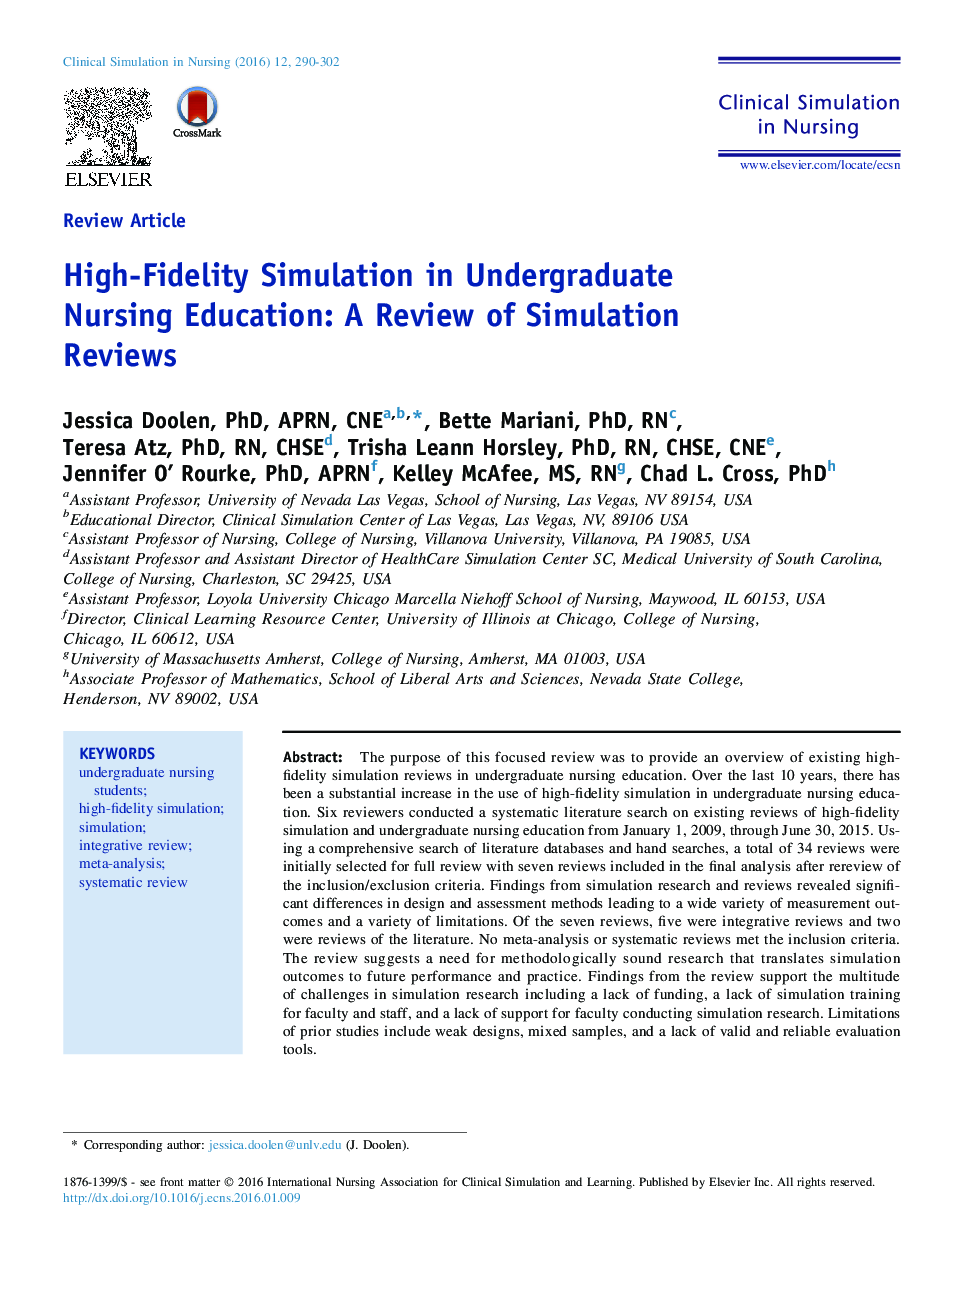 High-Fidelity Simulation in Undergraduate Nursing Education: A Review of Simulation Reviews